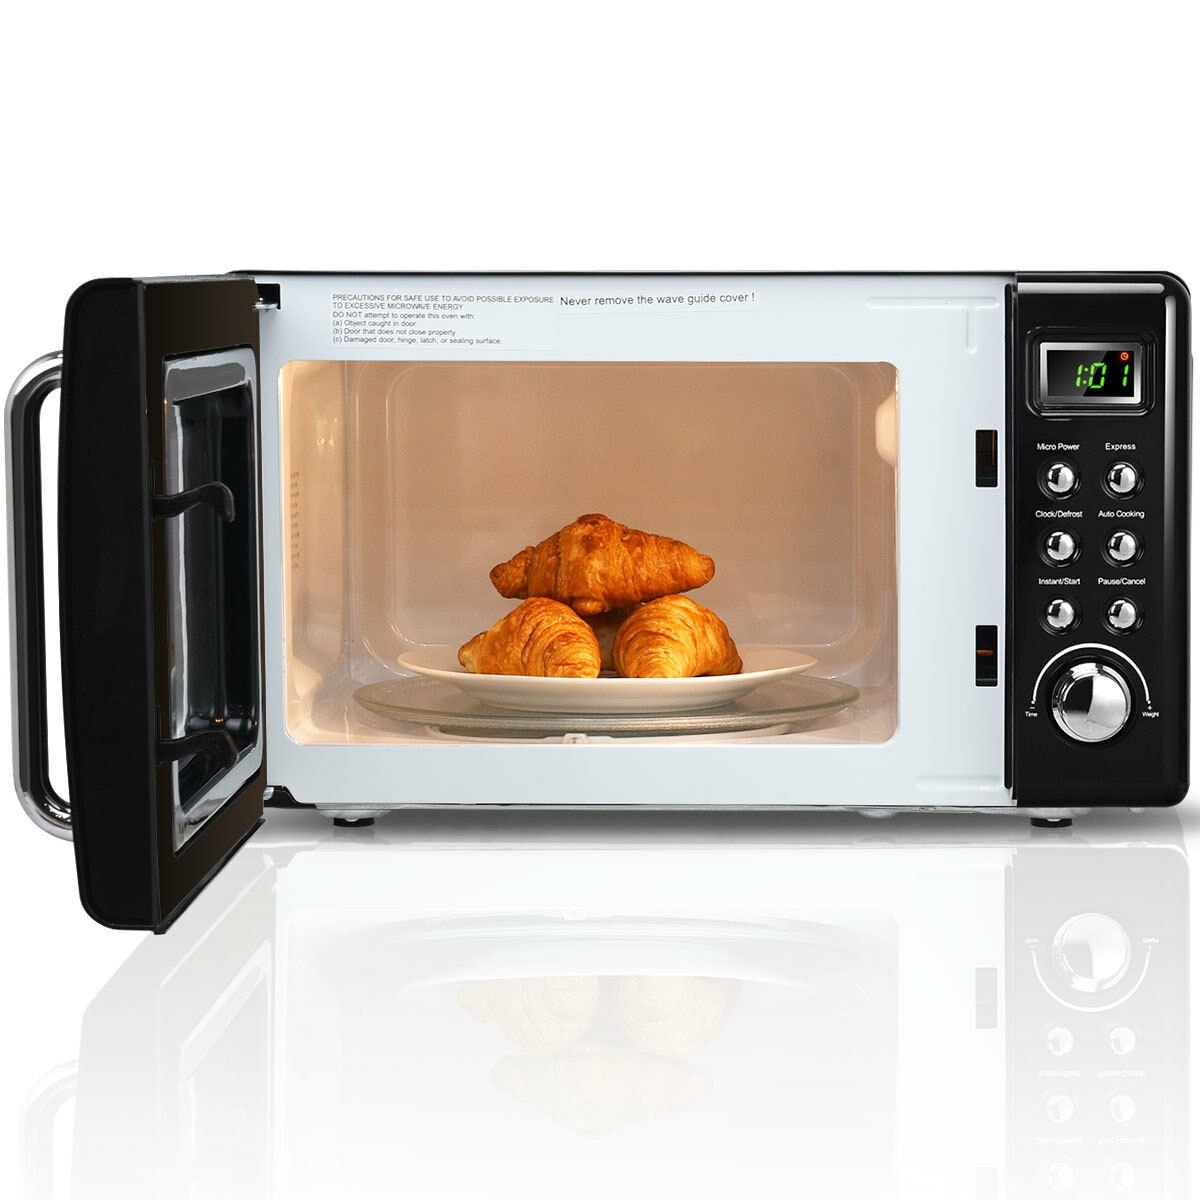 https://ak1.ostkcdn.com/images/products/is/images/direct/0260a66e62ff648ee61085514215c6446f338dfb/Costway-0.7Cu.ft-Retro-Countertop-Microwave-Oven-700W-LED-Display-Glass-Turntable-BlackWhite.jpg